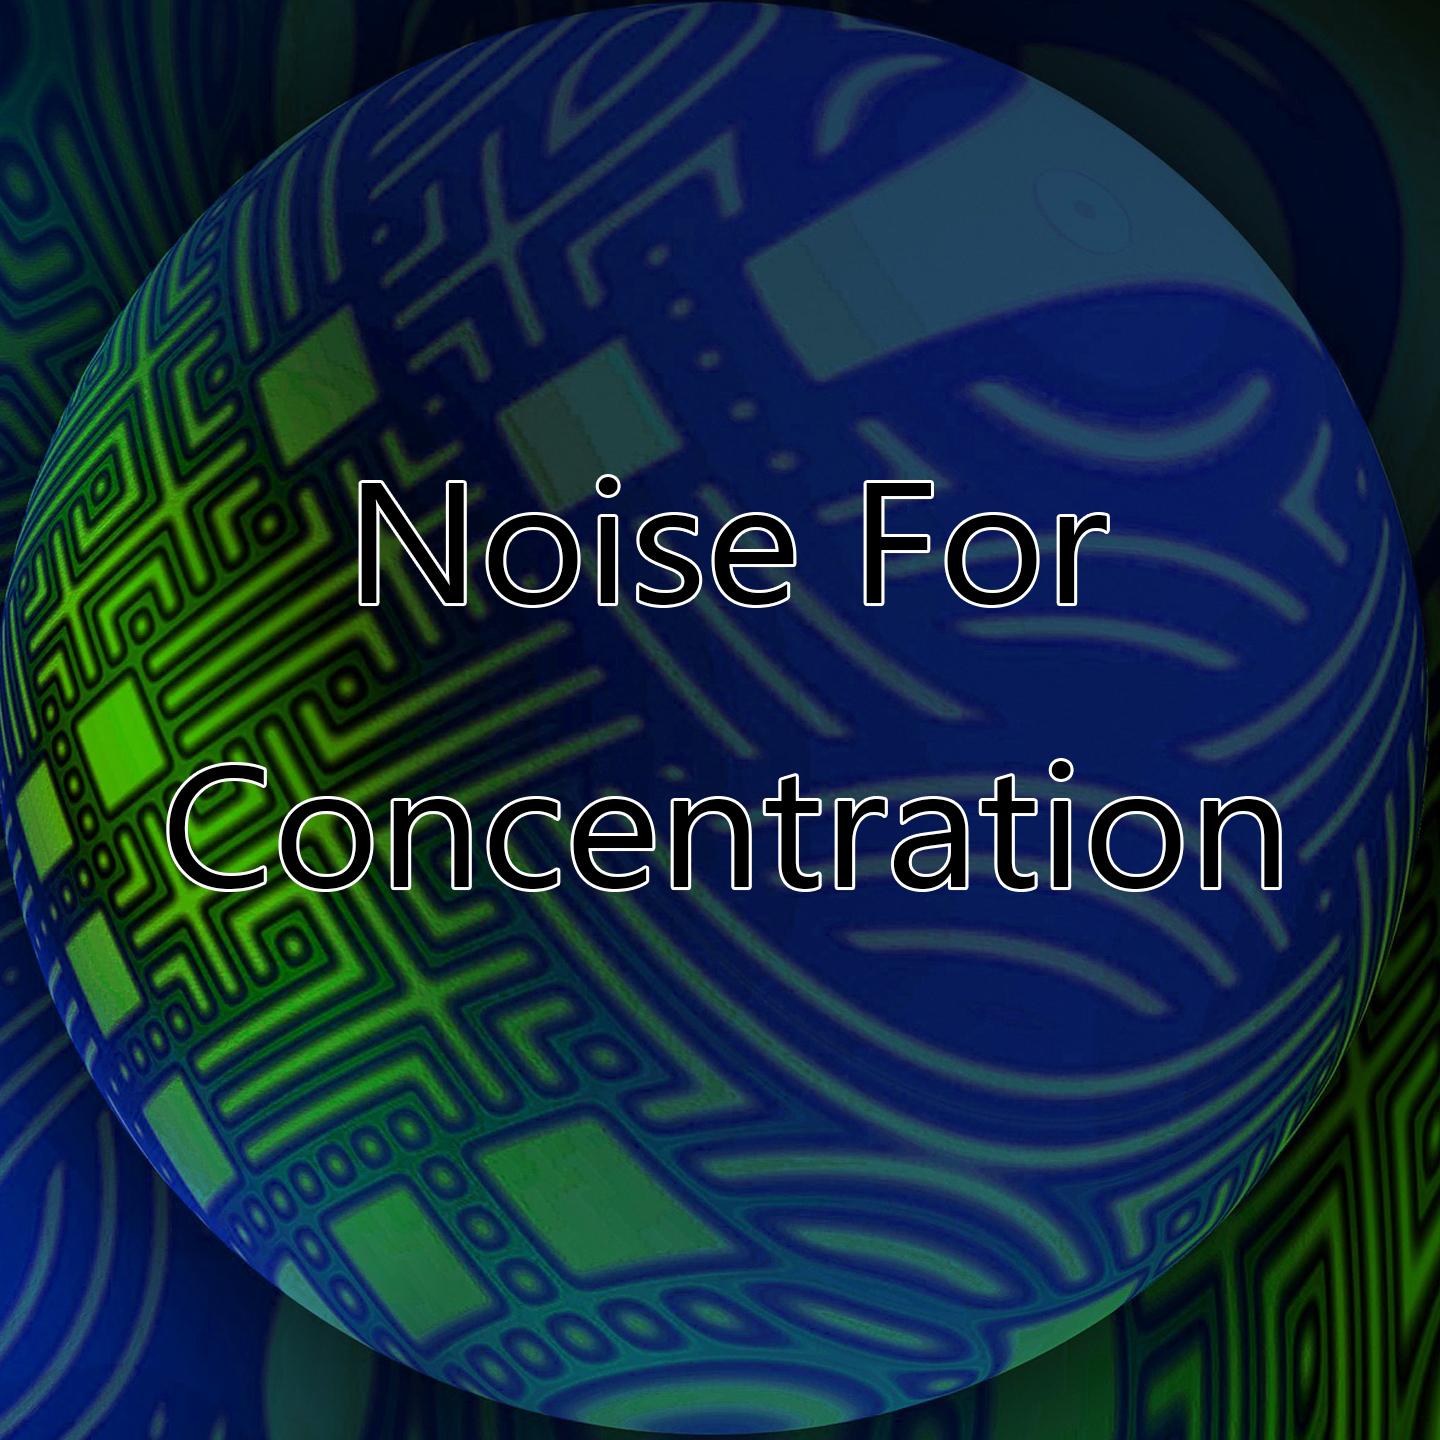 Noise For Concentration